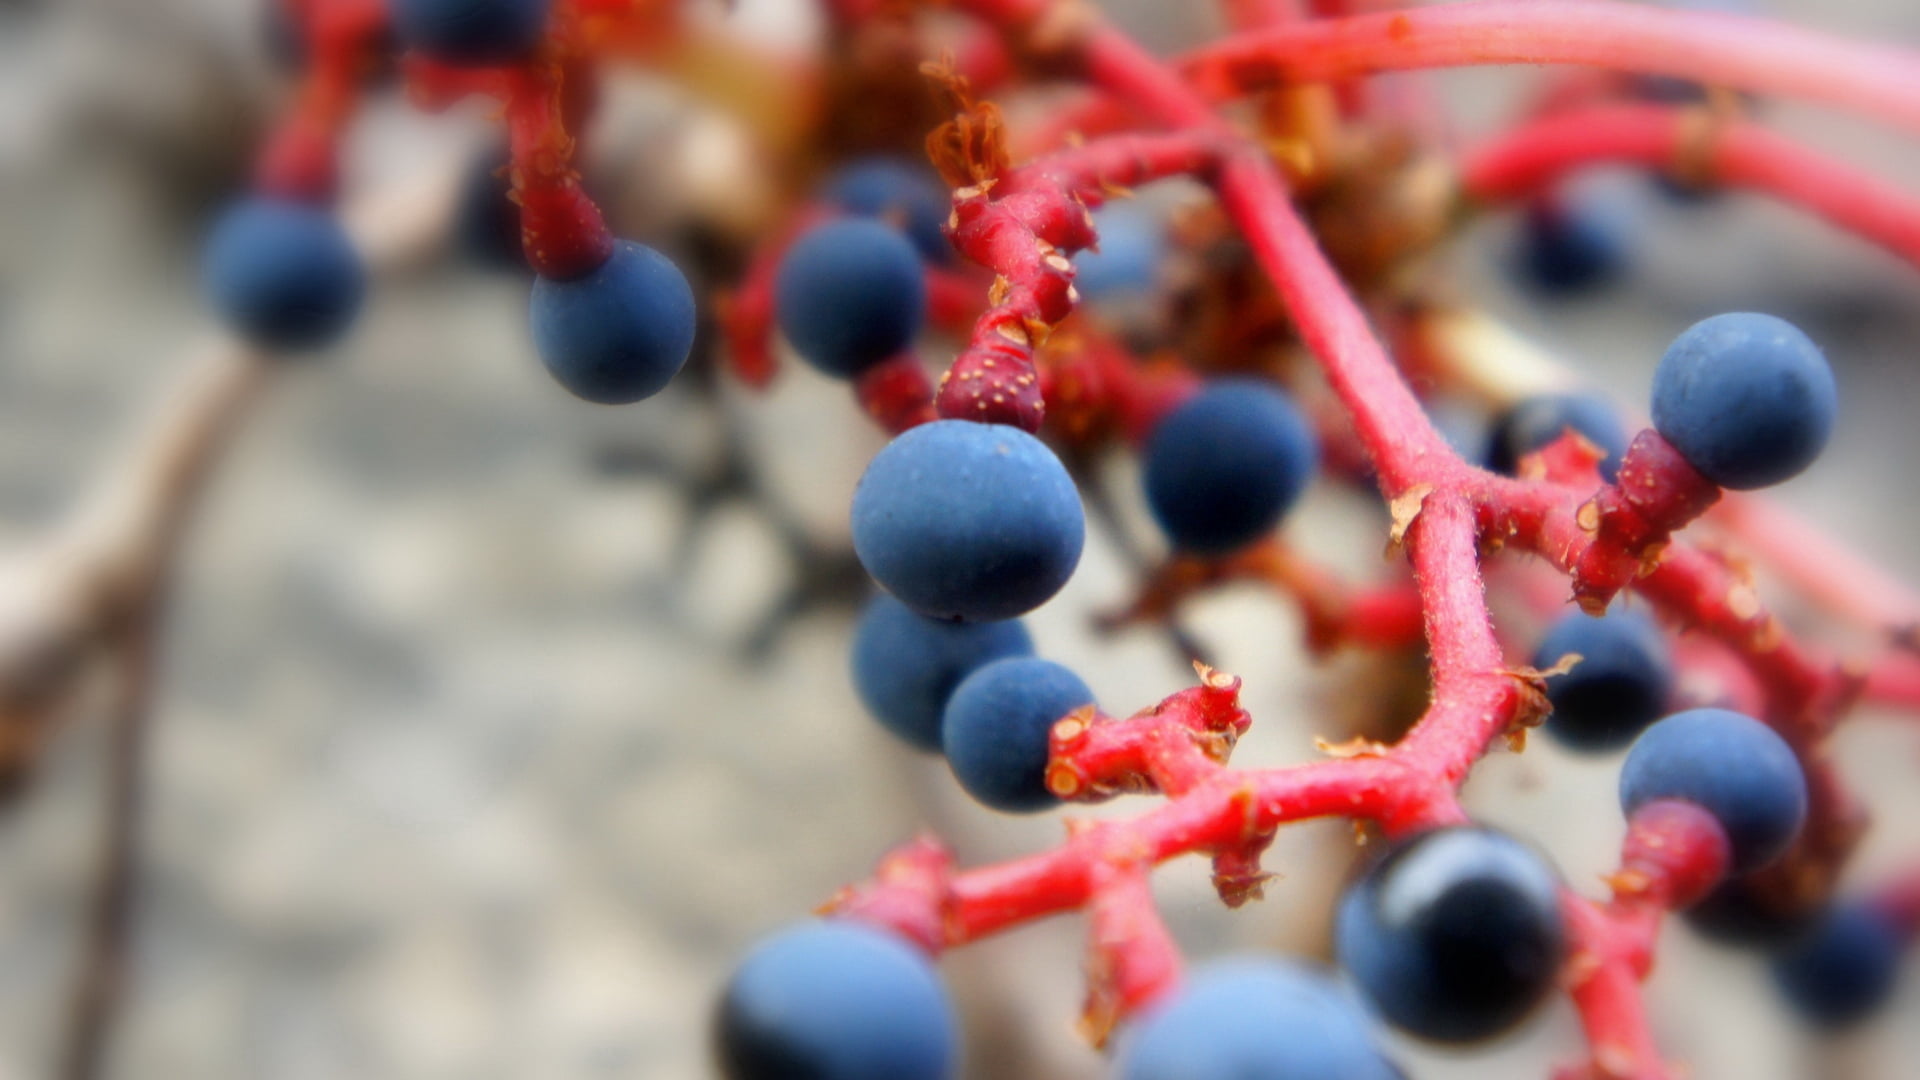 blue berry fruit, berries, branch, ripe, red, nature, close-up